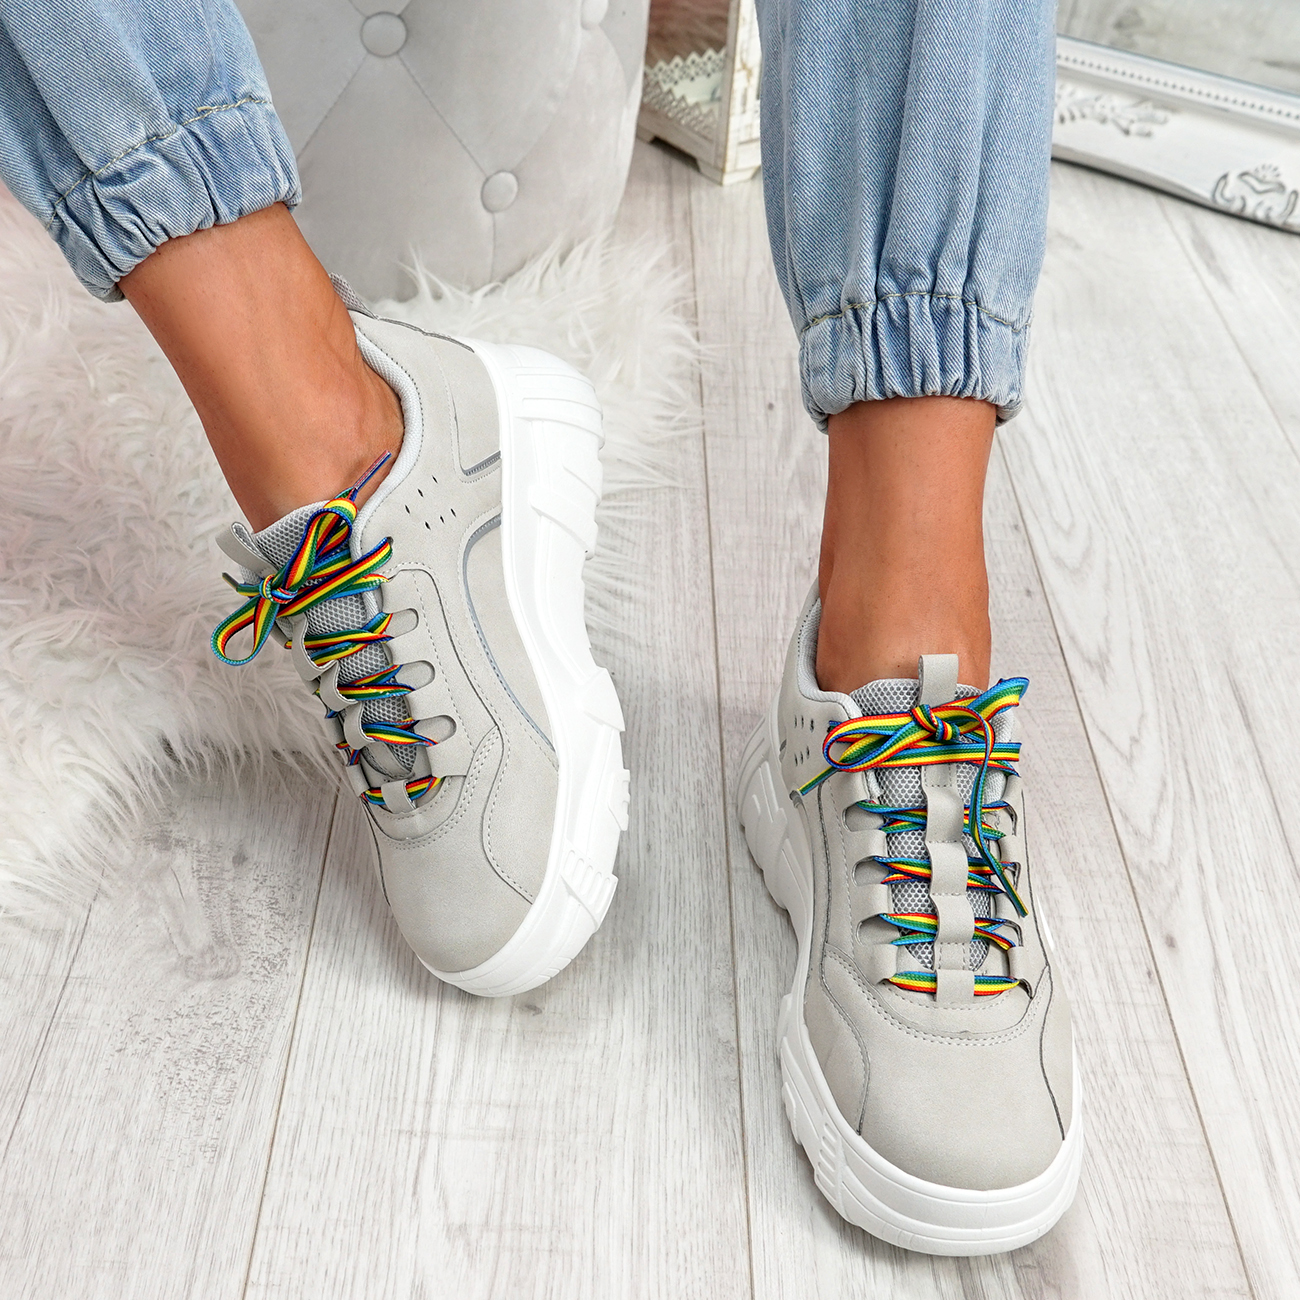 WOMENS LADIES CHUNKY PLATFORM TRAINERS RAINBOW LACE UP SNEAKERS PARTY ...